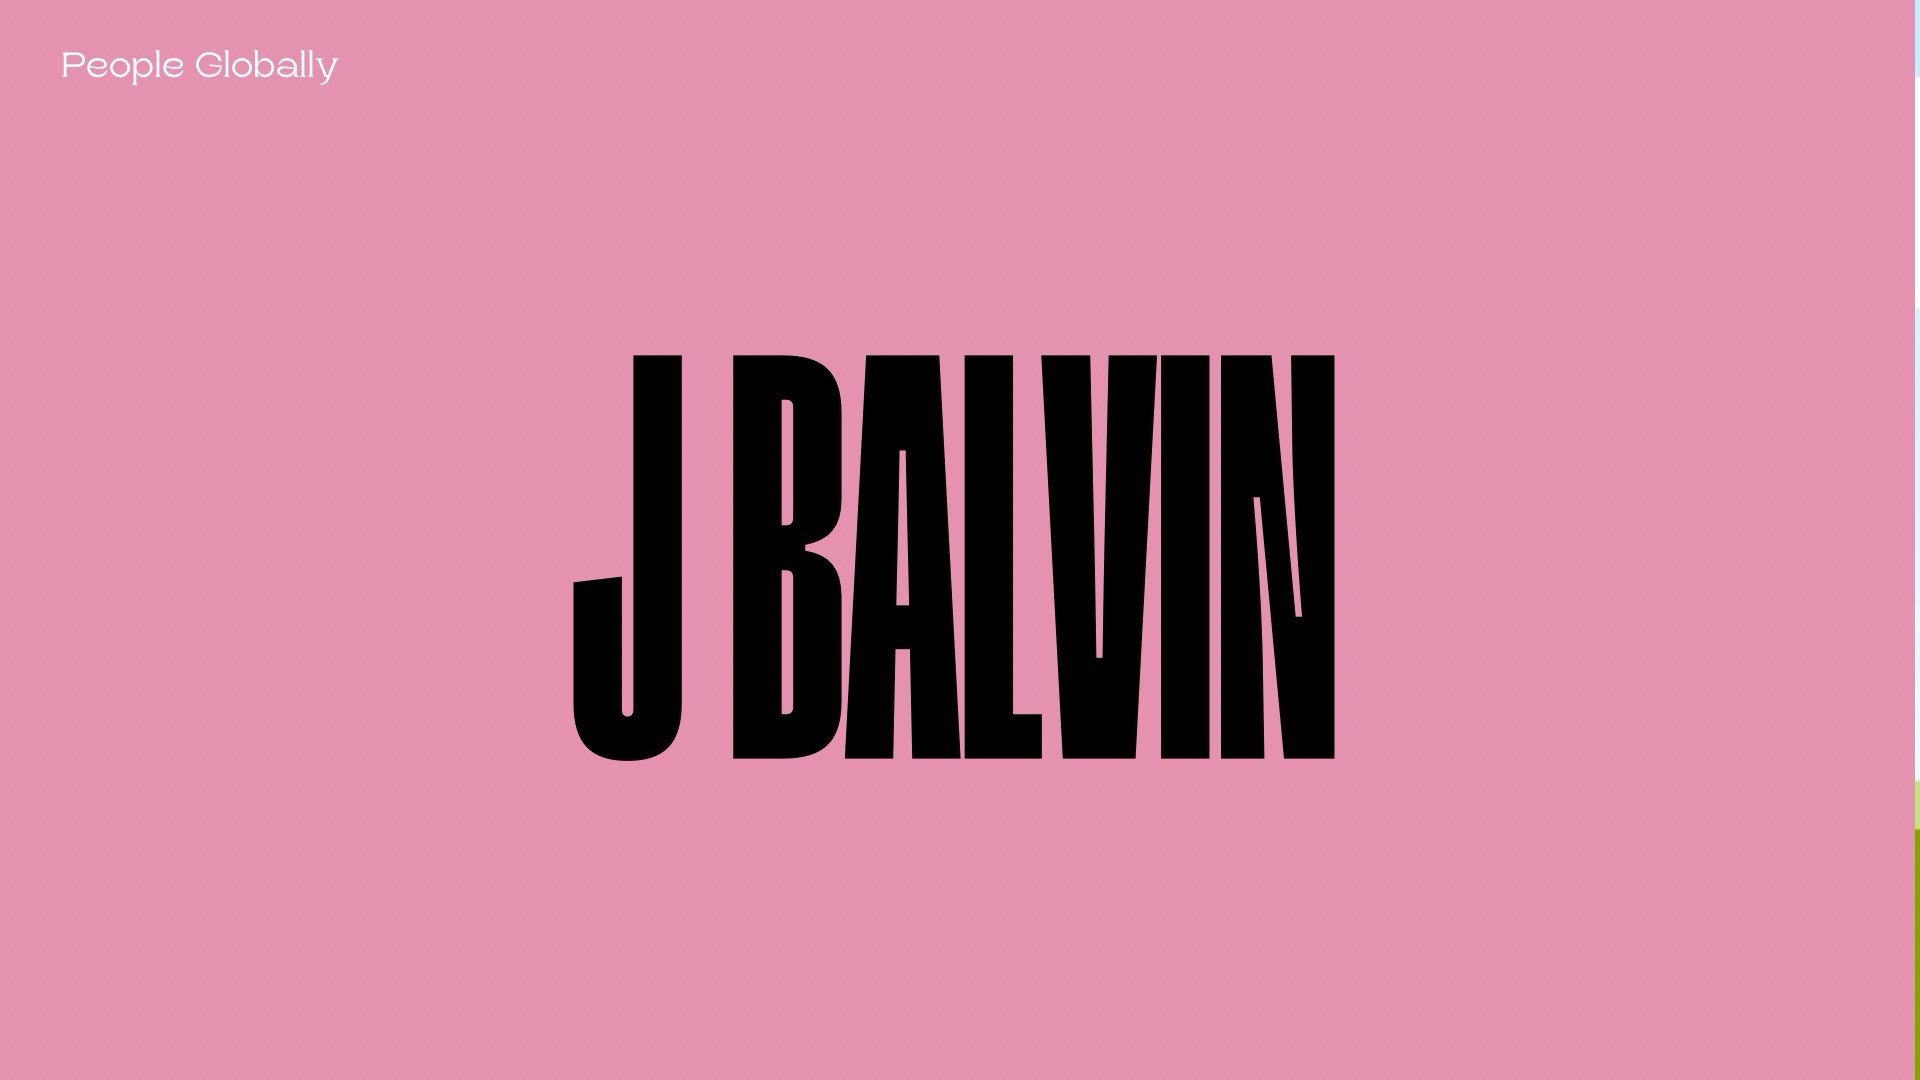 What is J Balvin total number of monthly listeners on Spotify.